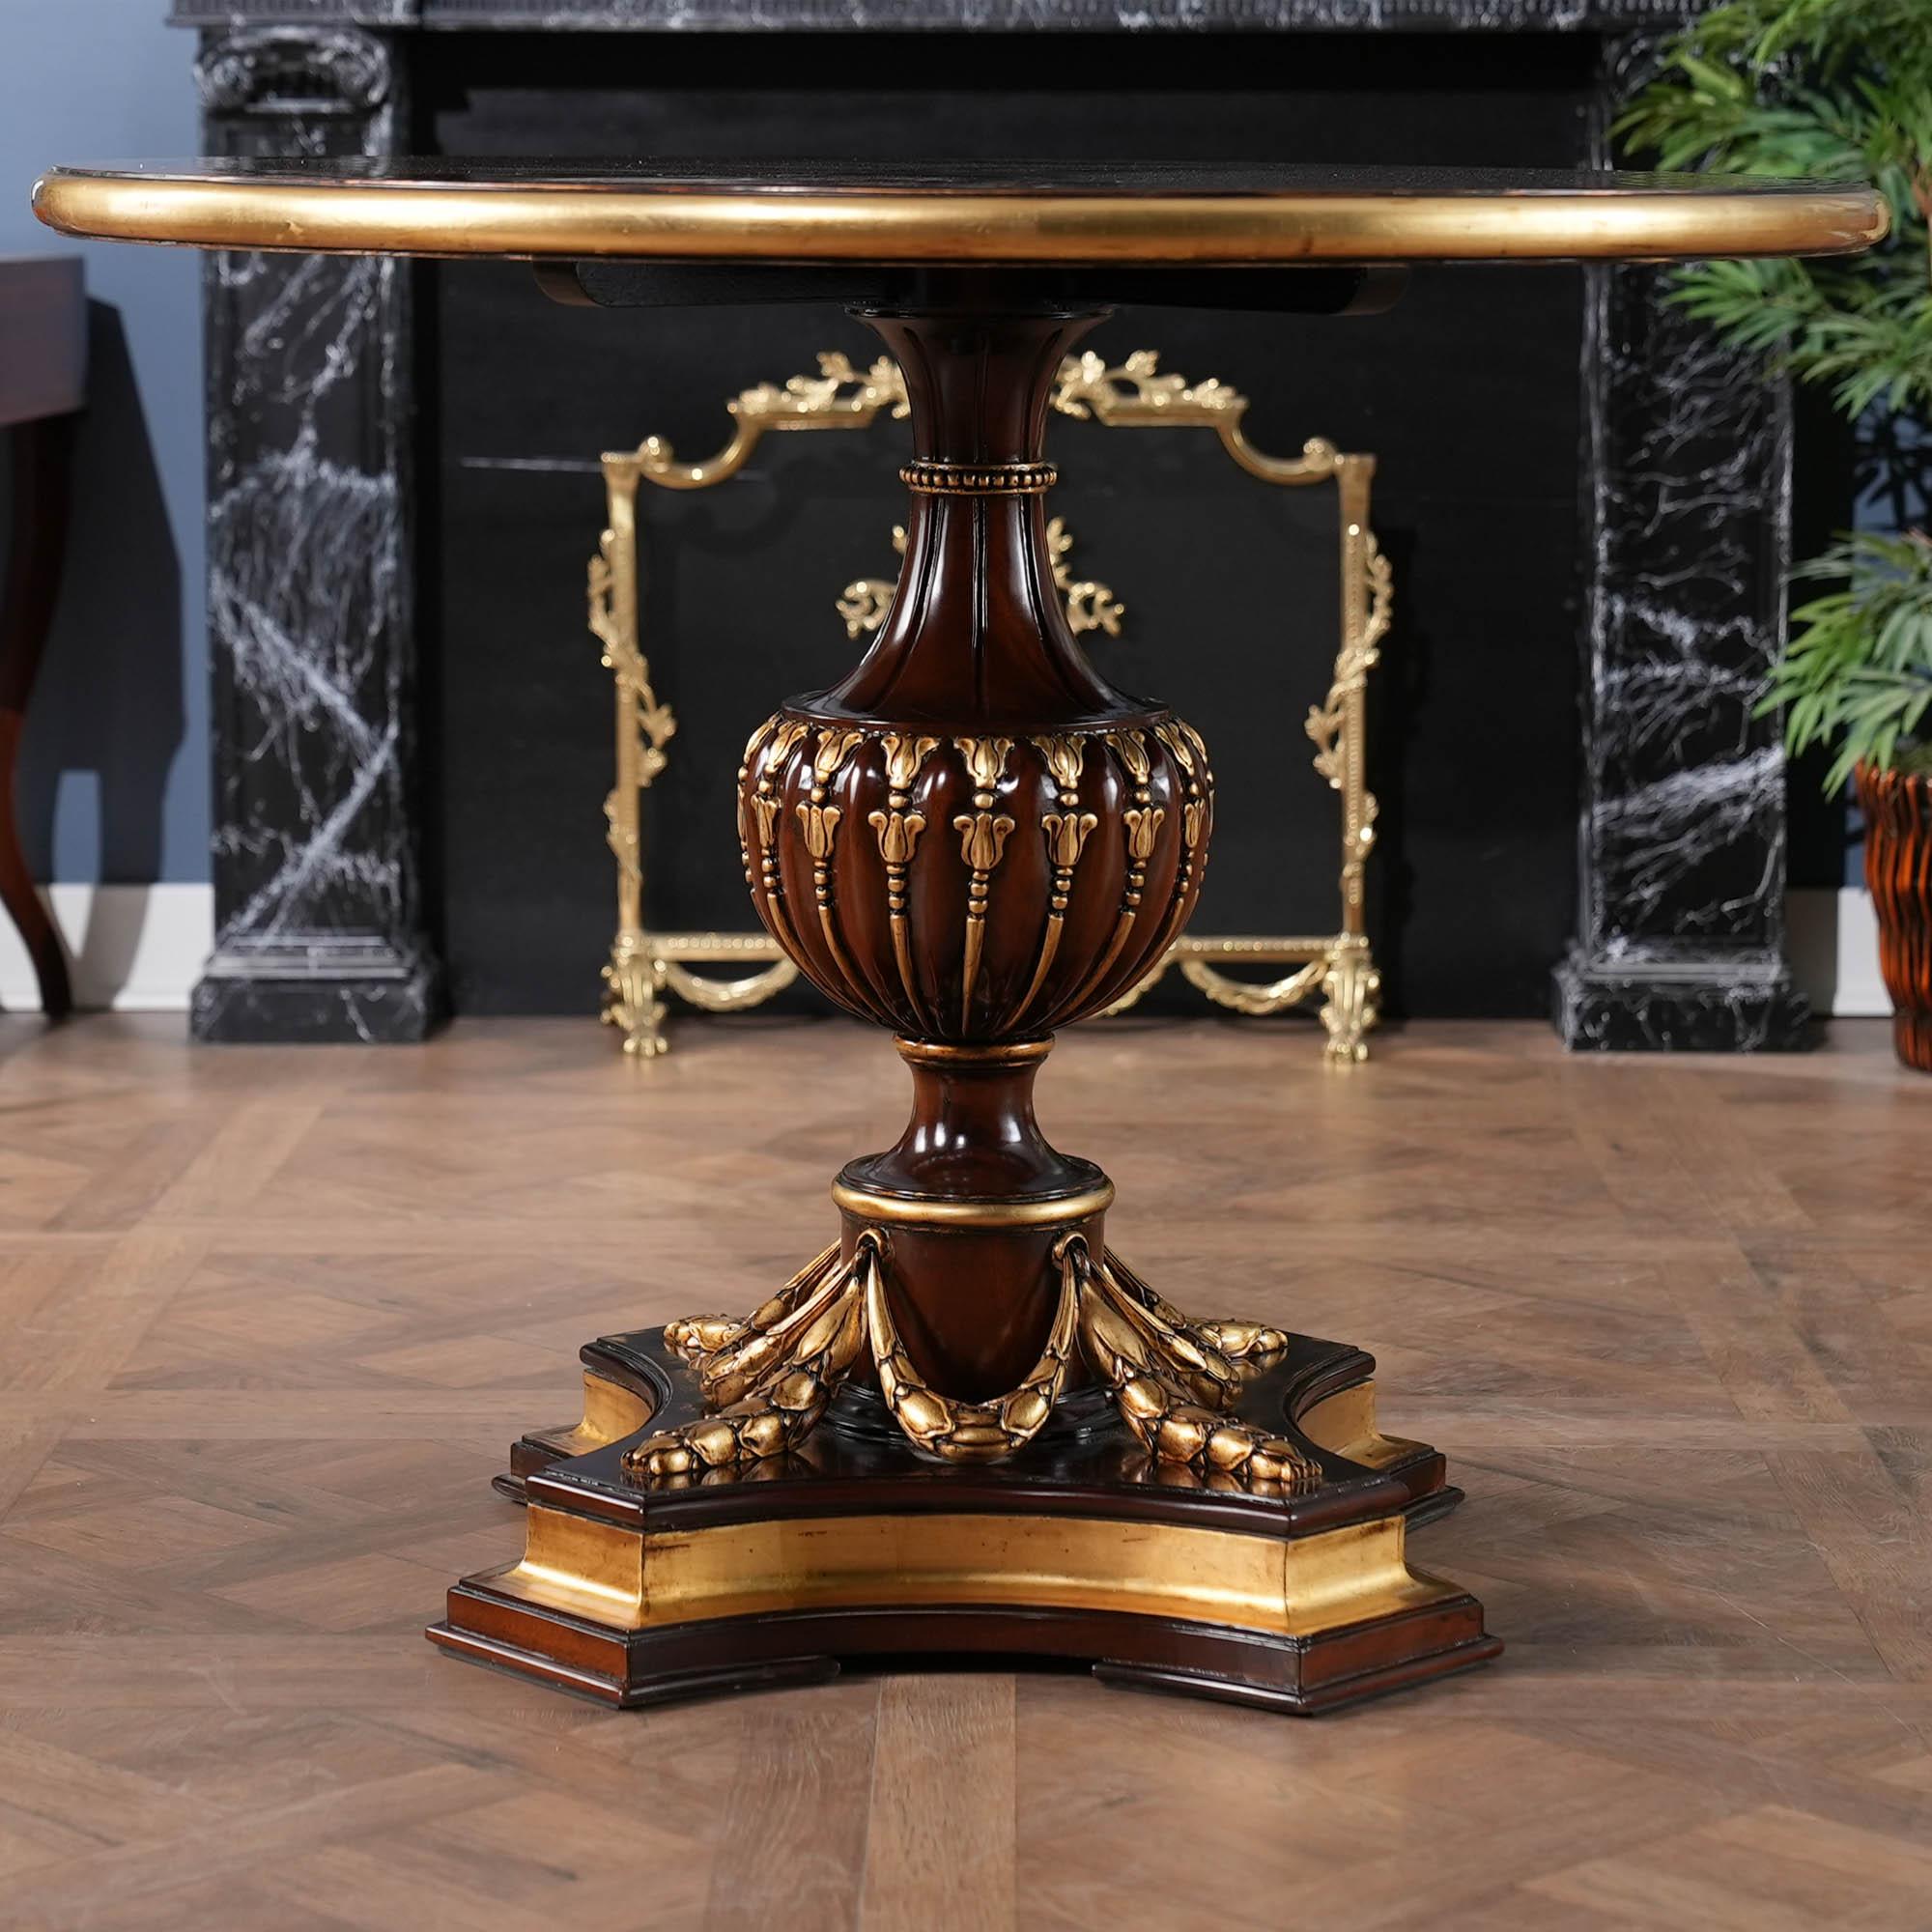 A gorgeous, high quality Mahogany Center Table with plenty of presence to brighten up any room. Banded and figured mahogany top, hand carved solid mahogany base and real gold leaf accents all work together to create a table that could be the